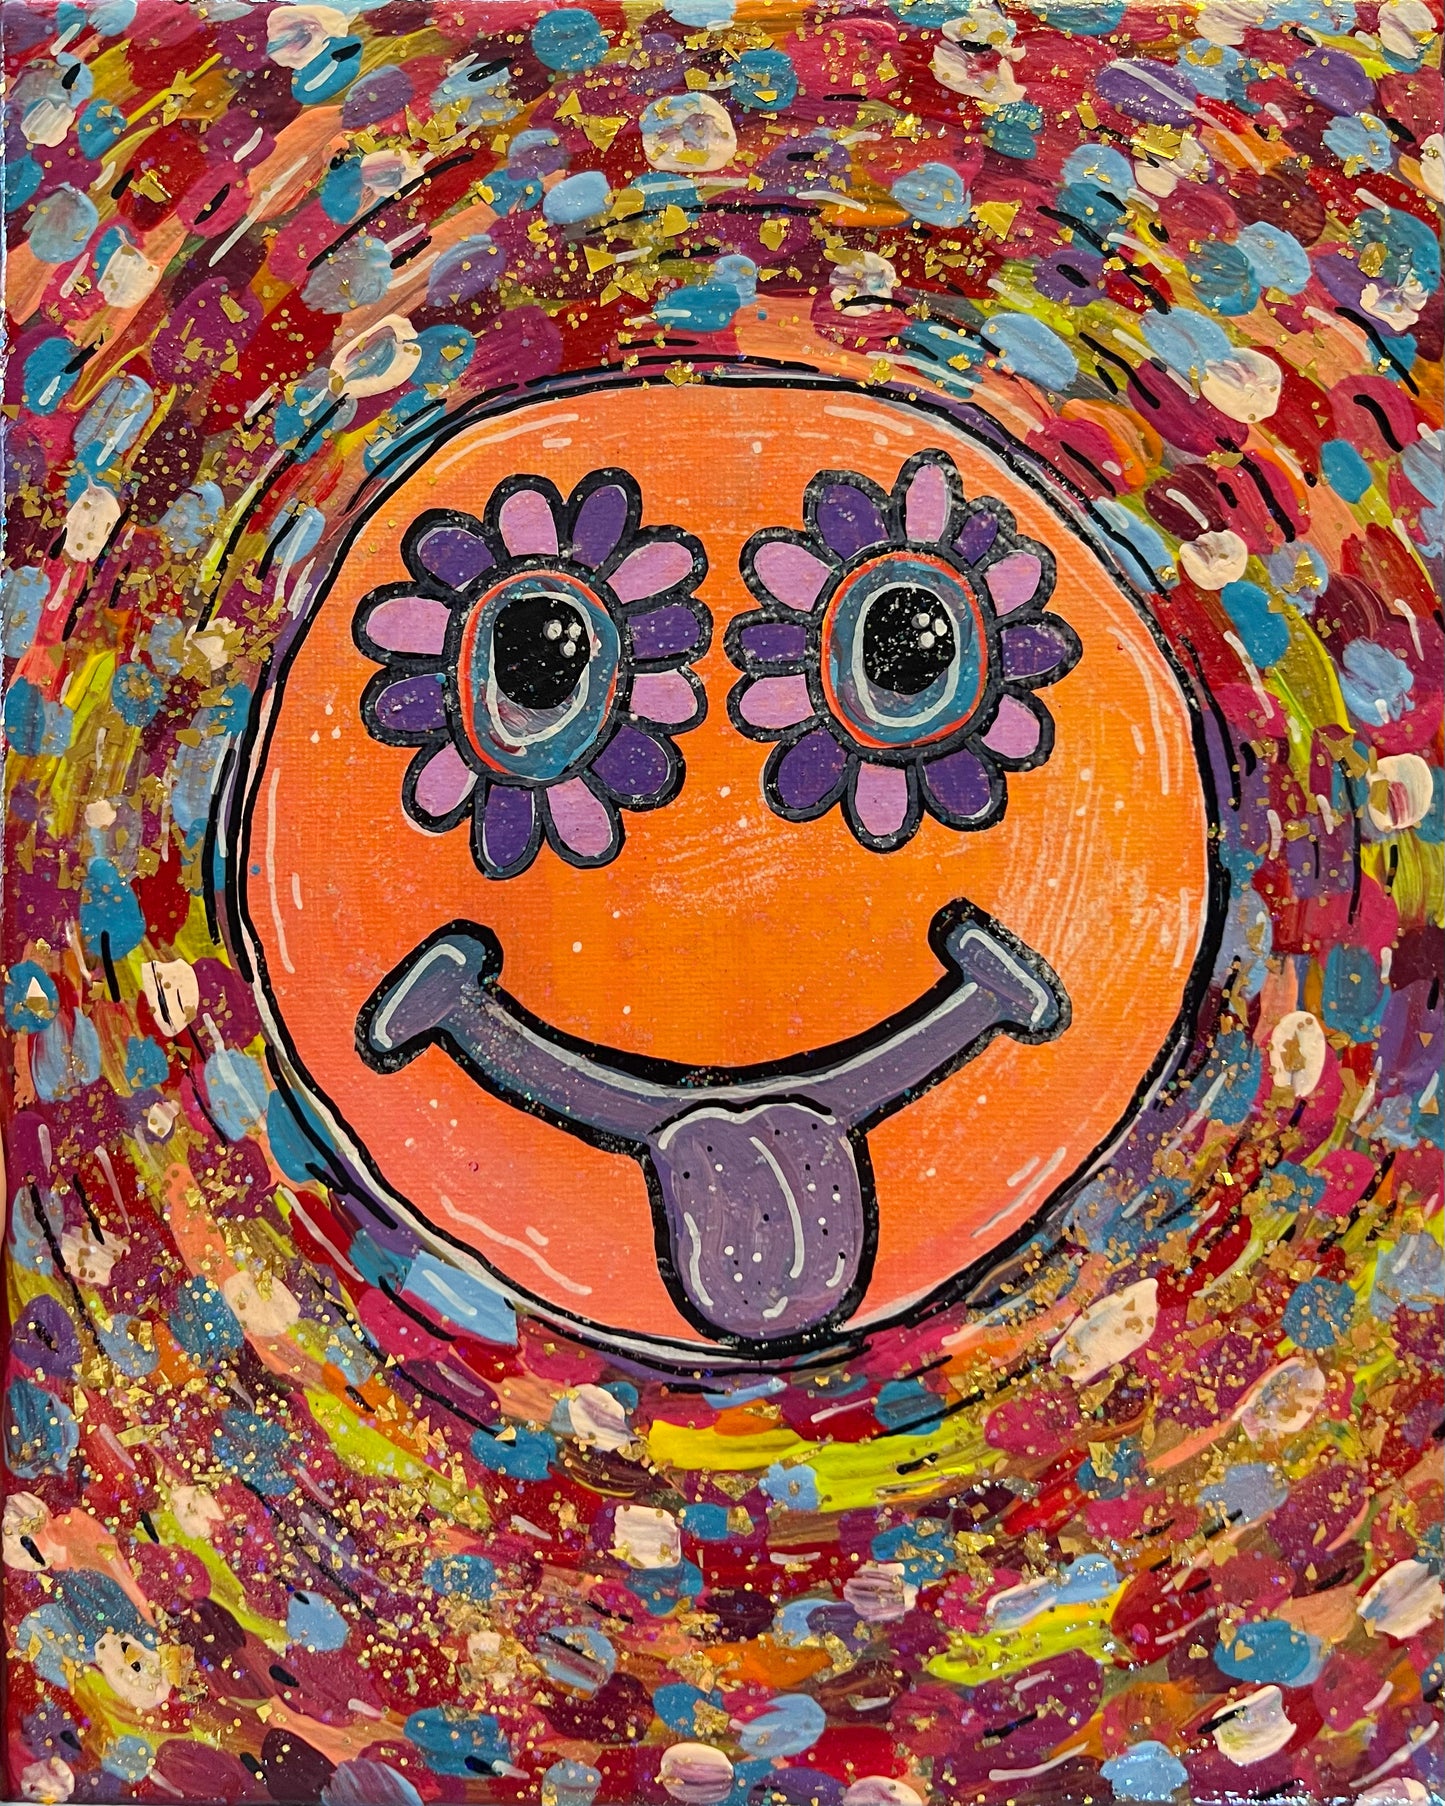 Tongue out smiley painting